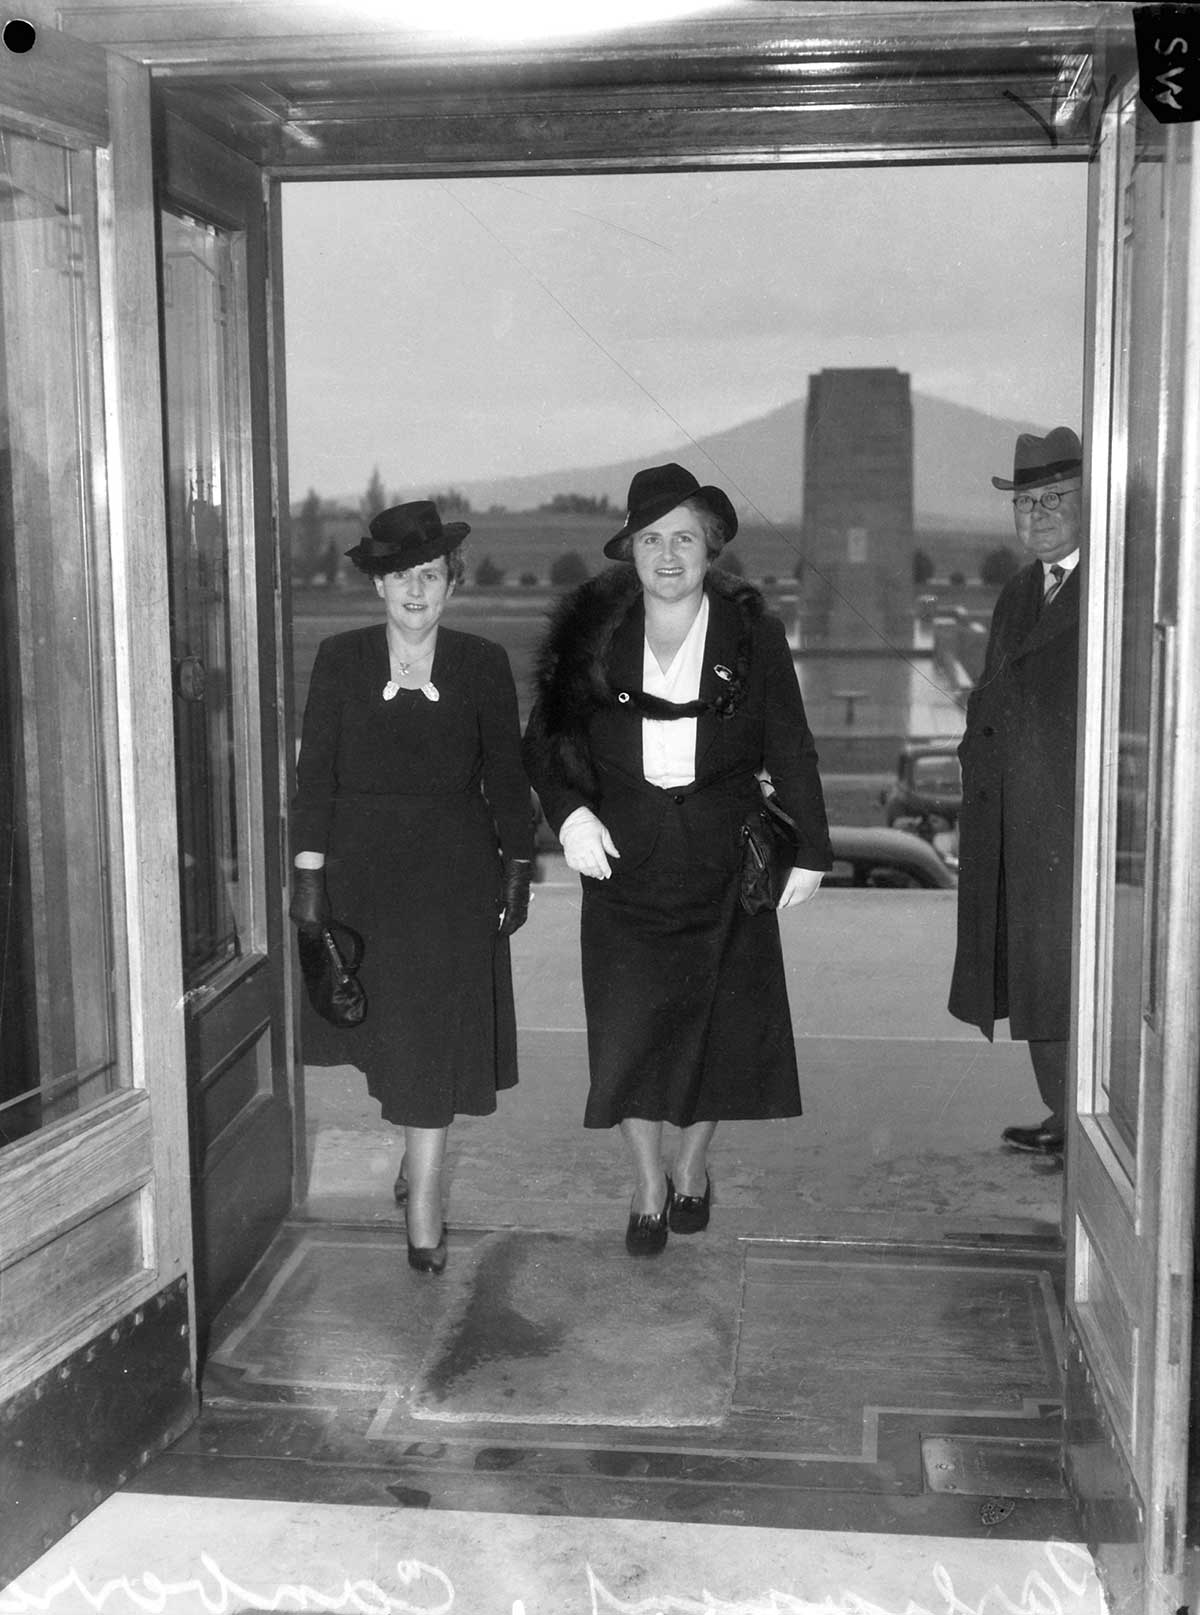 Black and white photograph of two smartly dressed females walking through an entrance of a building.